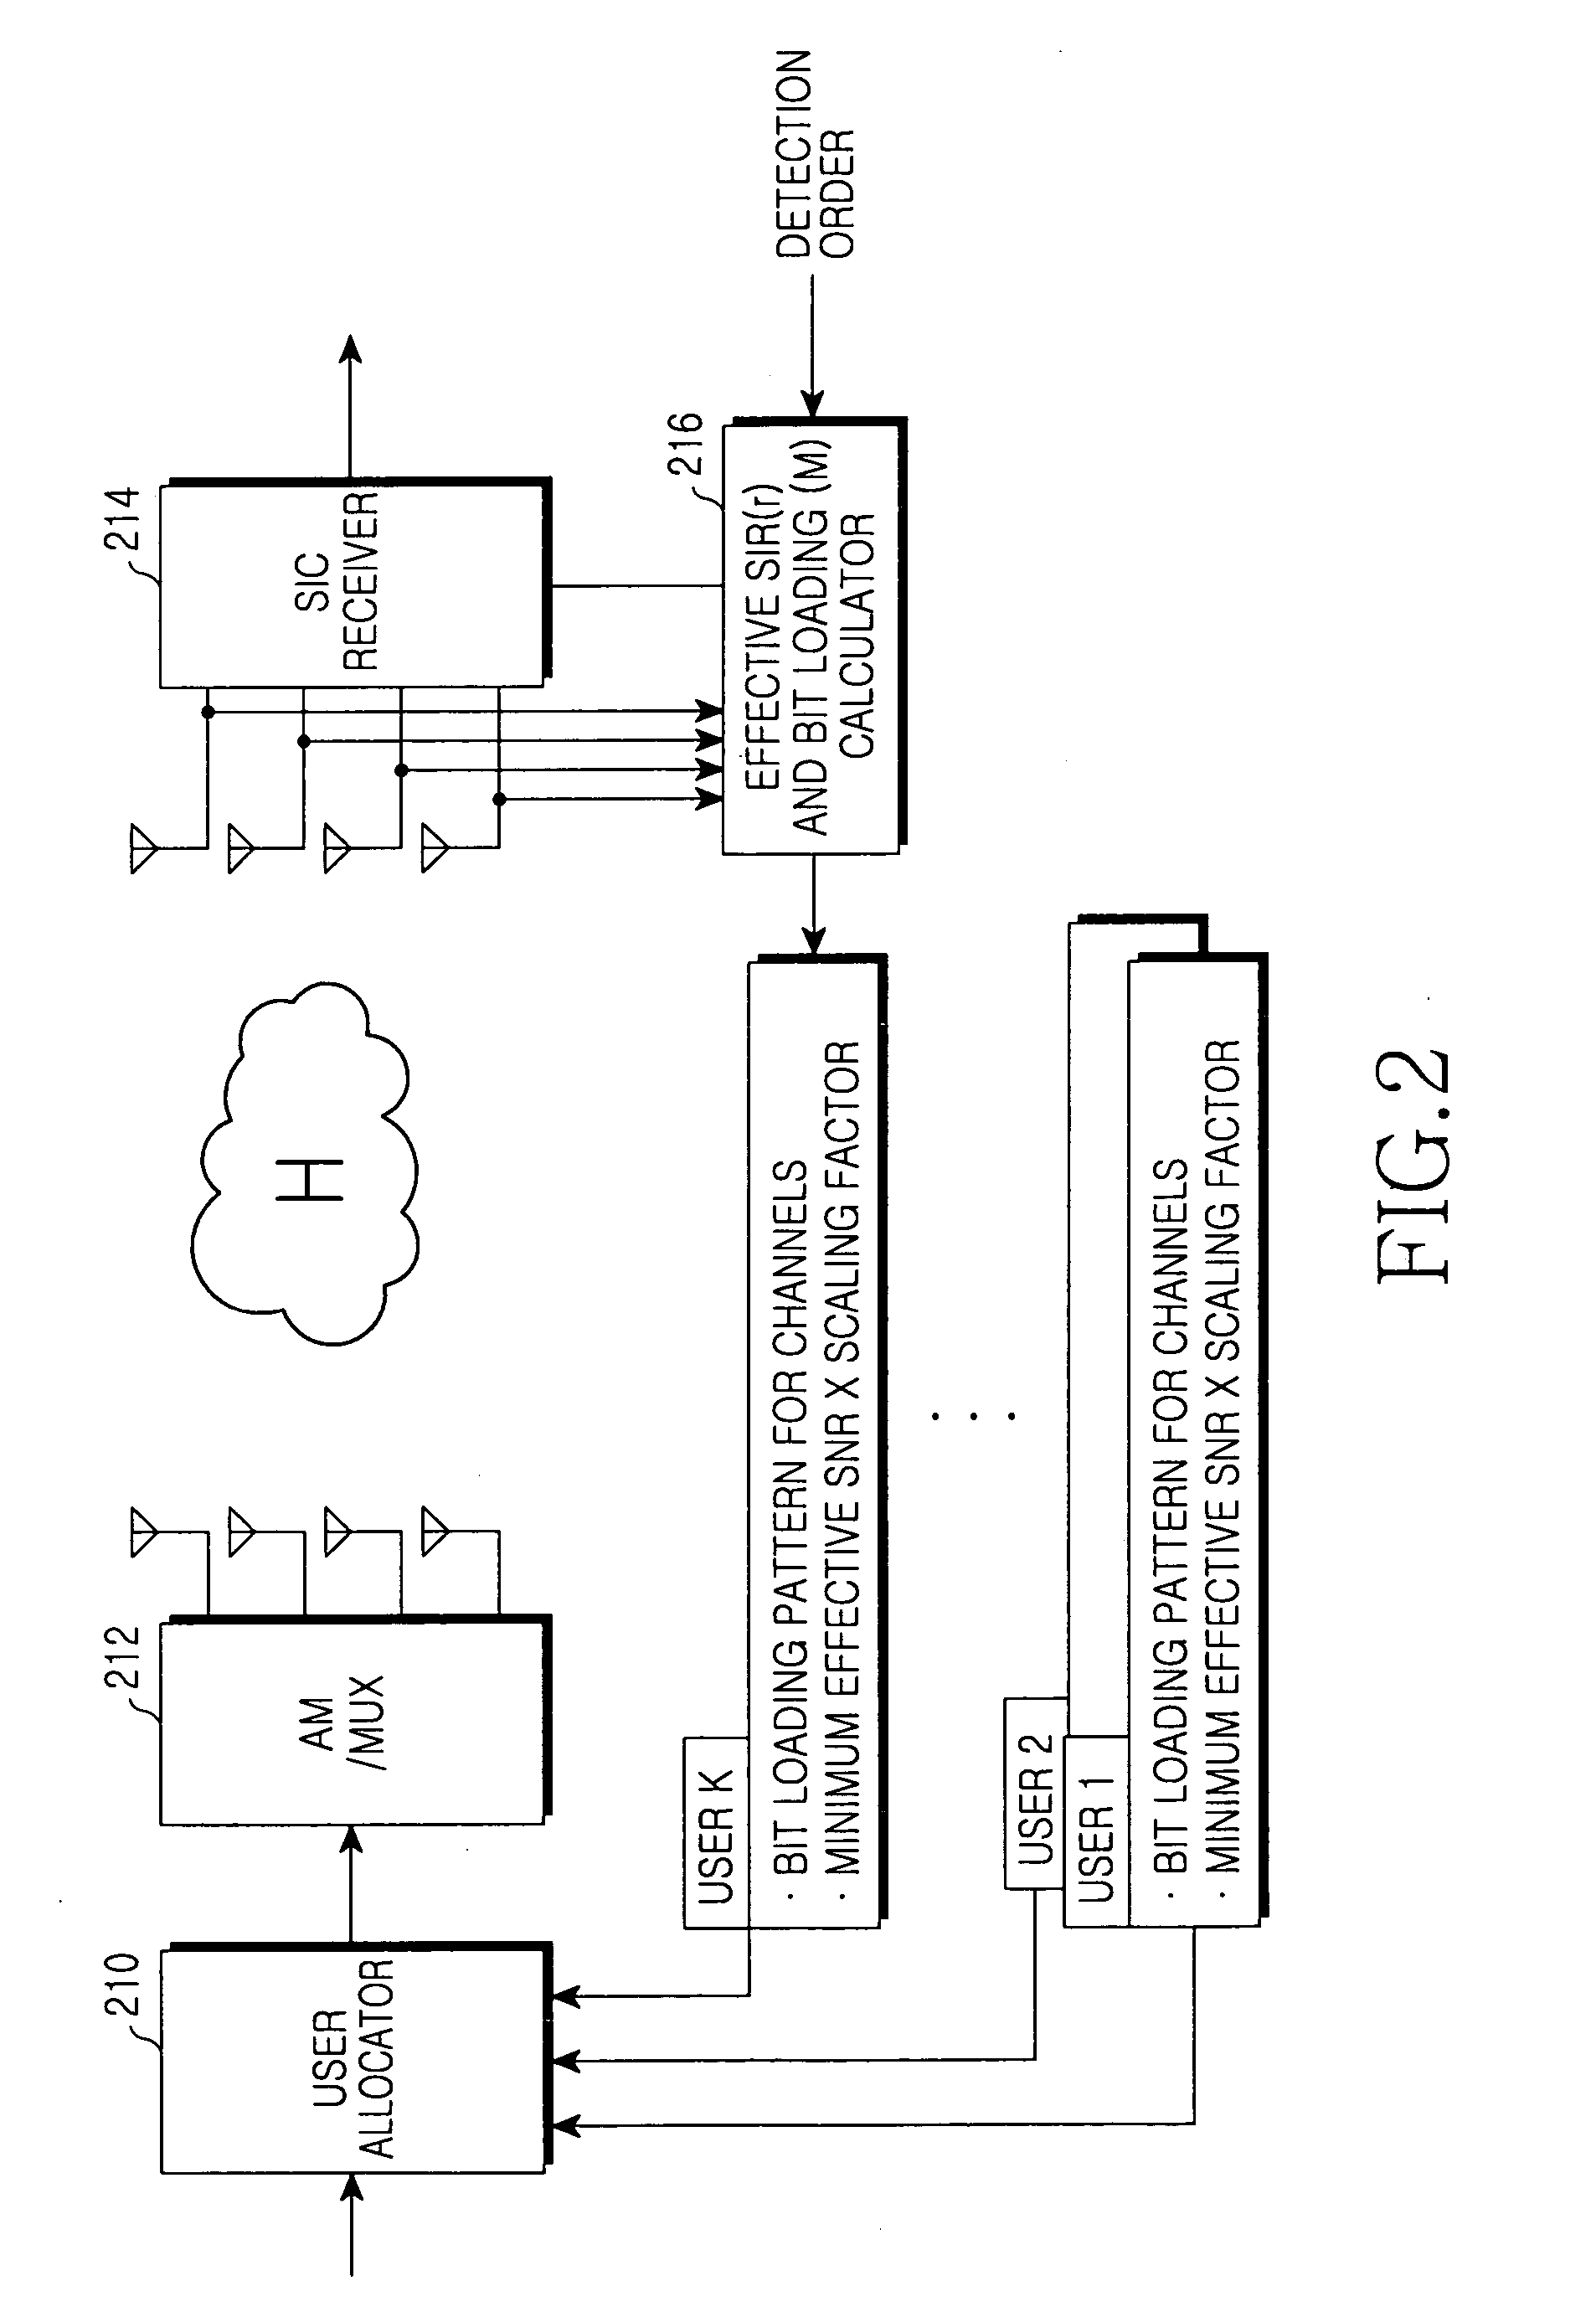 Apparatus and method for allocating user in a multiple antenna mobile communication system supporting multi-user diversity